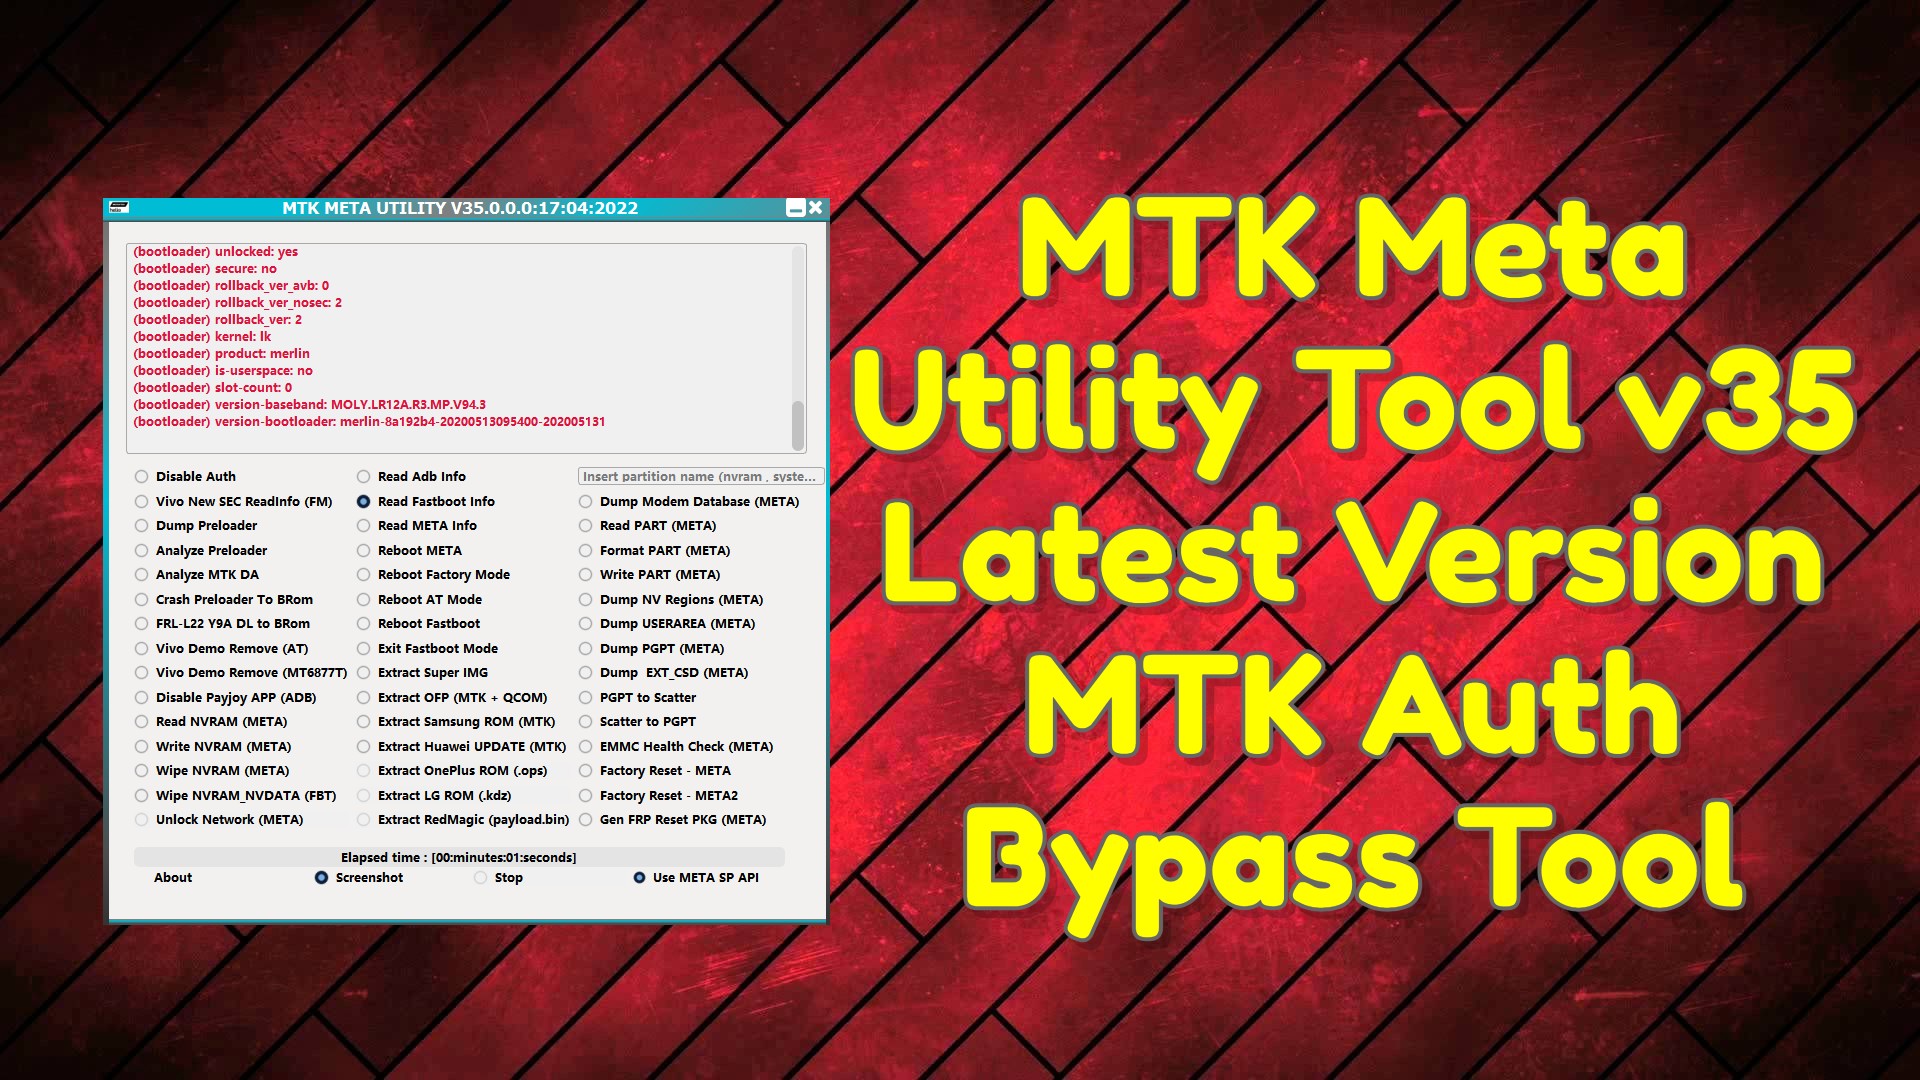 MTK Meta Utility Tool v35 Latest Version MTK Auth Bypass Tool